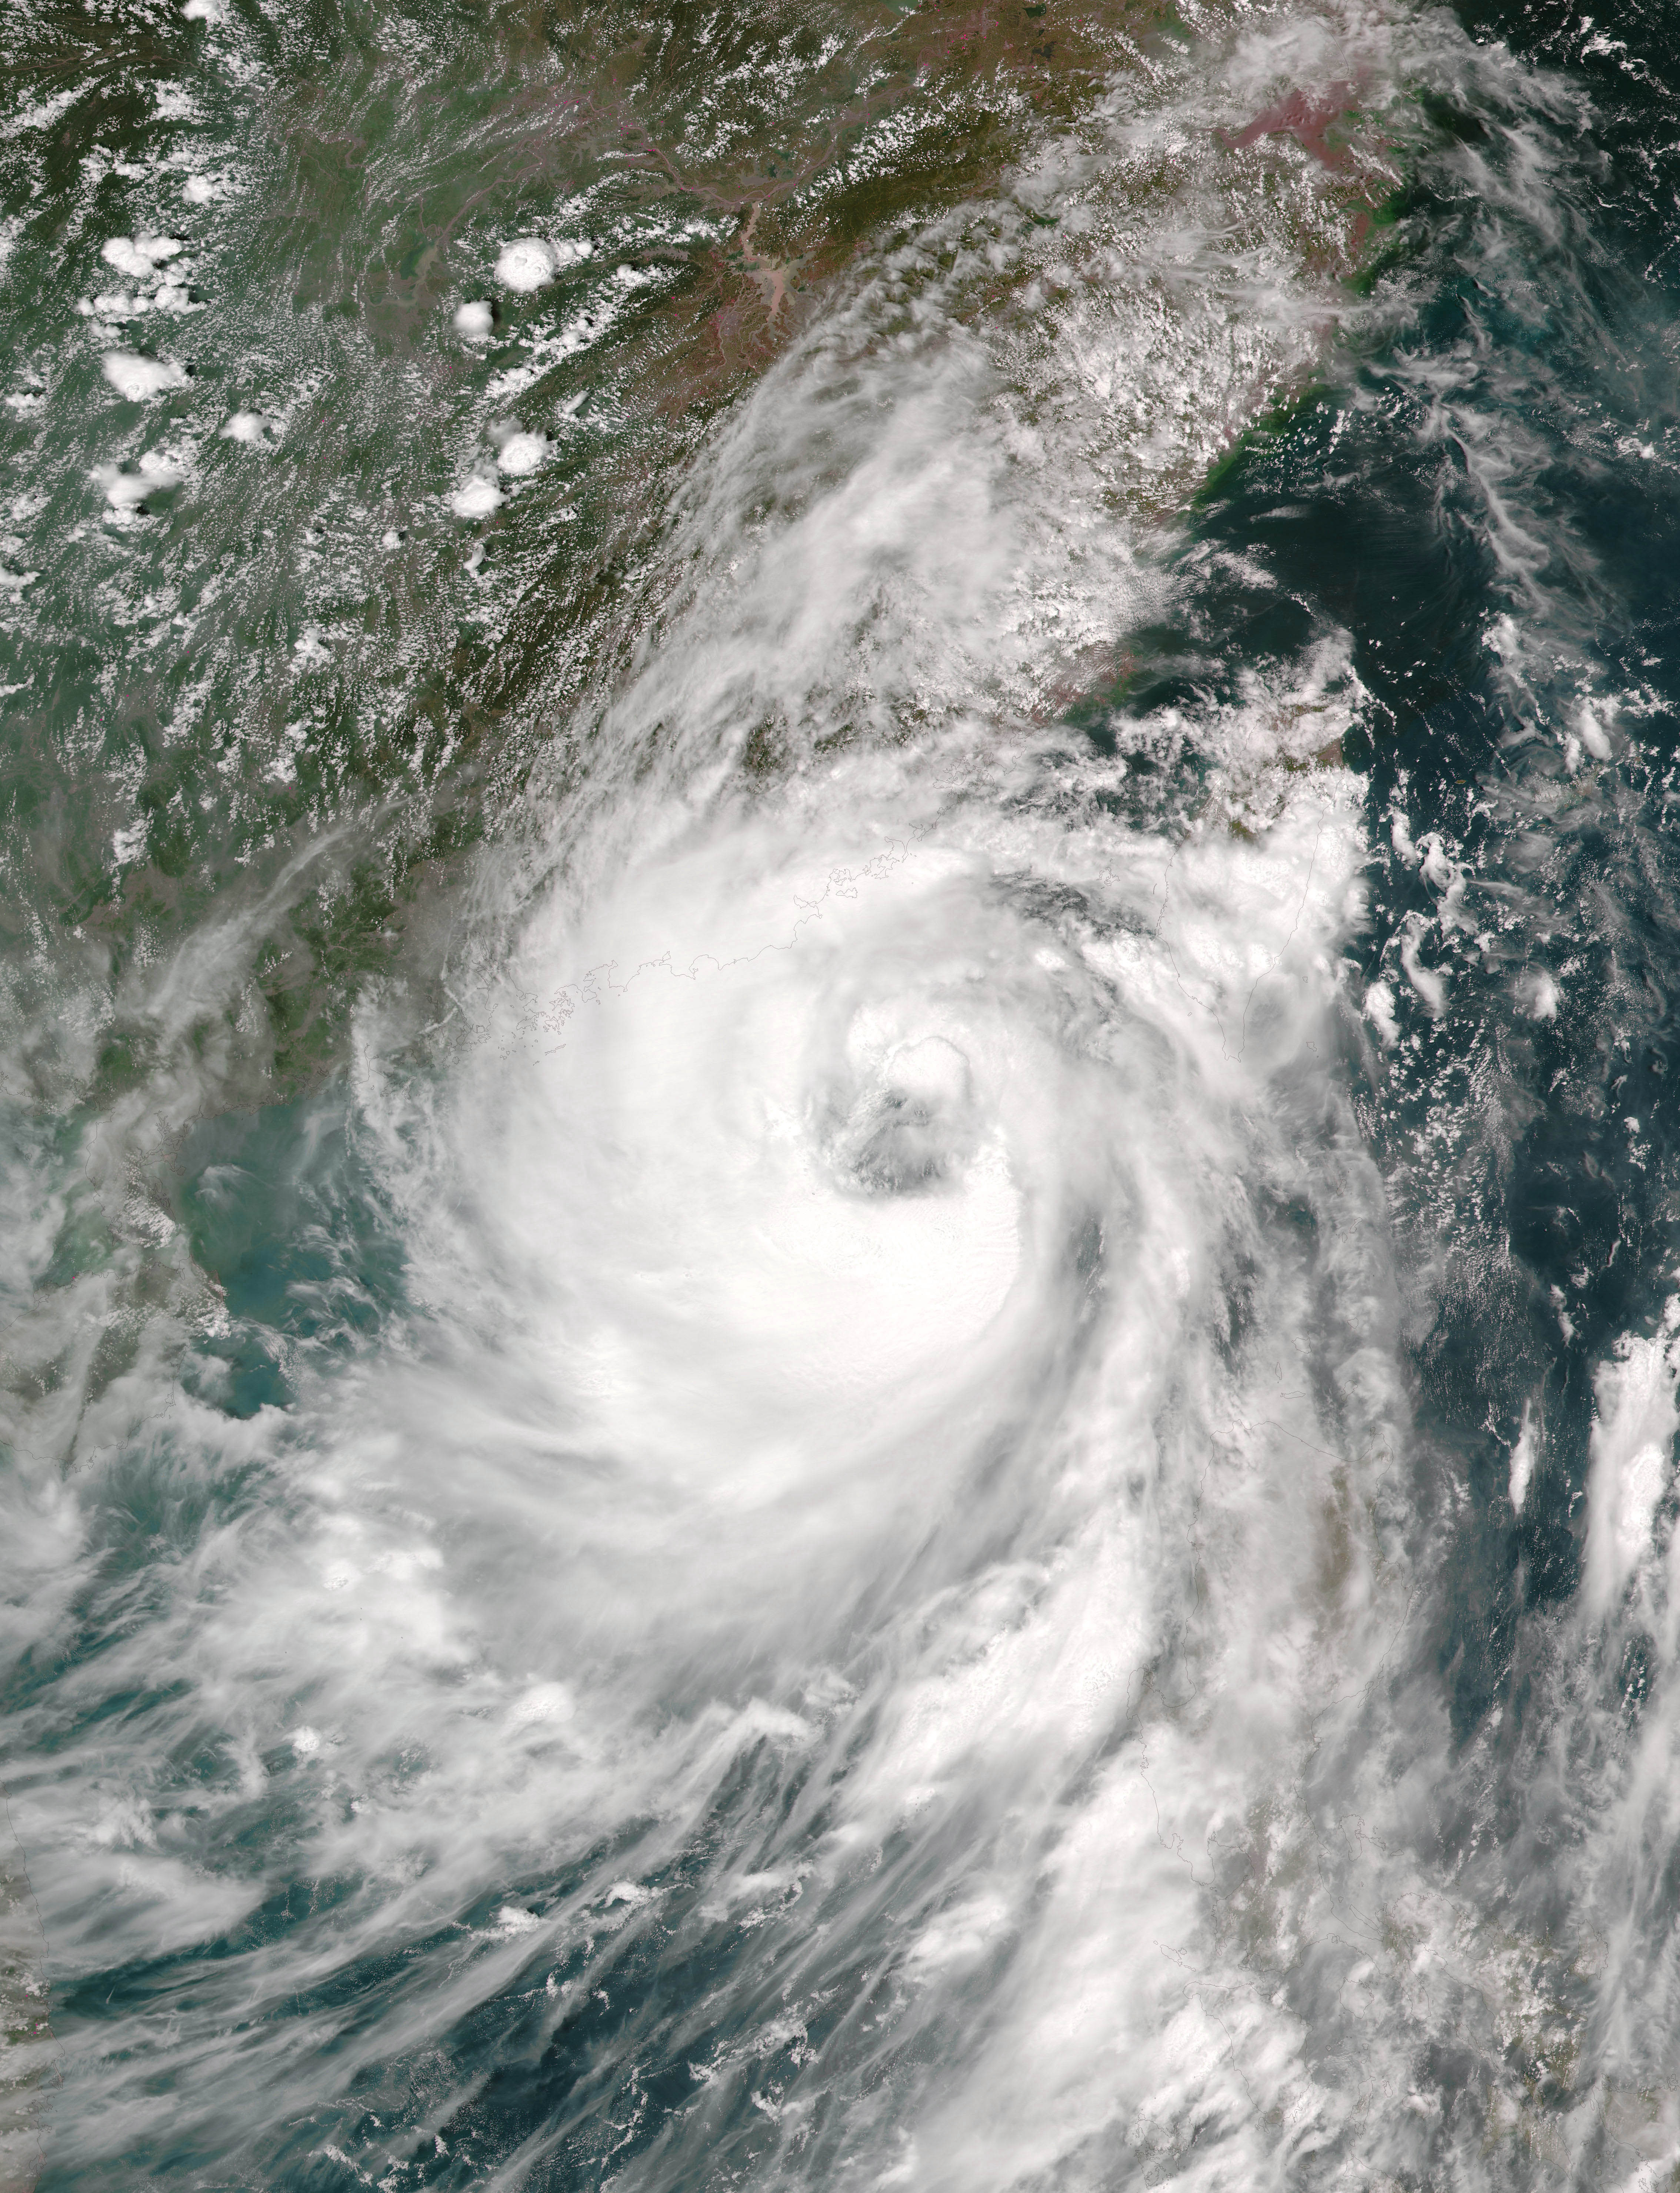 This August 1, 2016 NASA satellite imag shows Typhoon Nida approaching China. Hong Kong hunkered down August 1 as Typhoon Nida swirled towards it, with more than 100 flights cancelled and schools closed, and Guangzhou in neighbouring mainland China issued its top storm alert. Hong Kong was expected to raise a "T8" storm signal -- the third-highest -- Monday evening as the storm edged closer to the city, packing winds of 120 kilometres (75 miles) per hour.  / AFP PHOTO / NASA / Handout / RESTRICTED TO EDITORIAL USE - MANDATORY CREDIT "AFP PHOTO / NASA" - NO MARKETING - NO ADVERTISING CAMPAIGNS - DISTRIBUTED AS A SERVICE TO CLIENTS